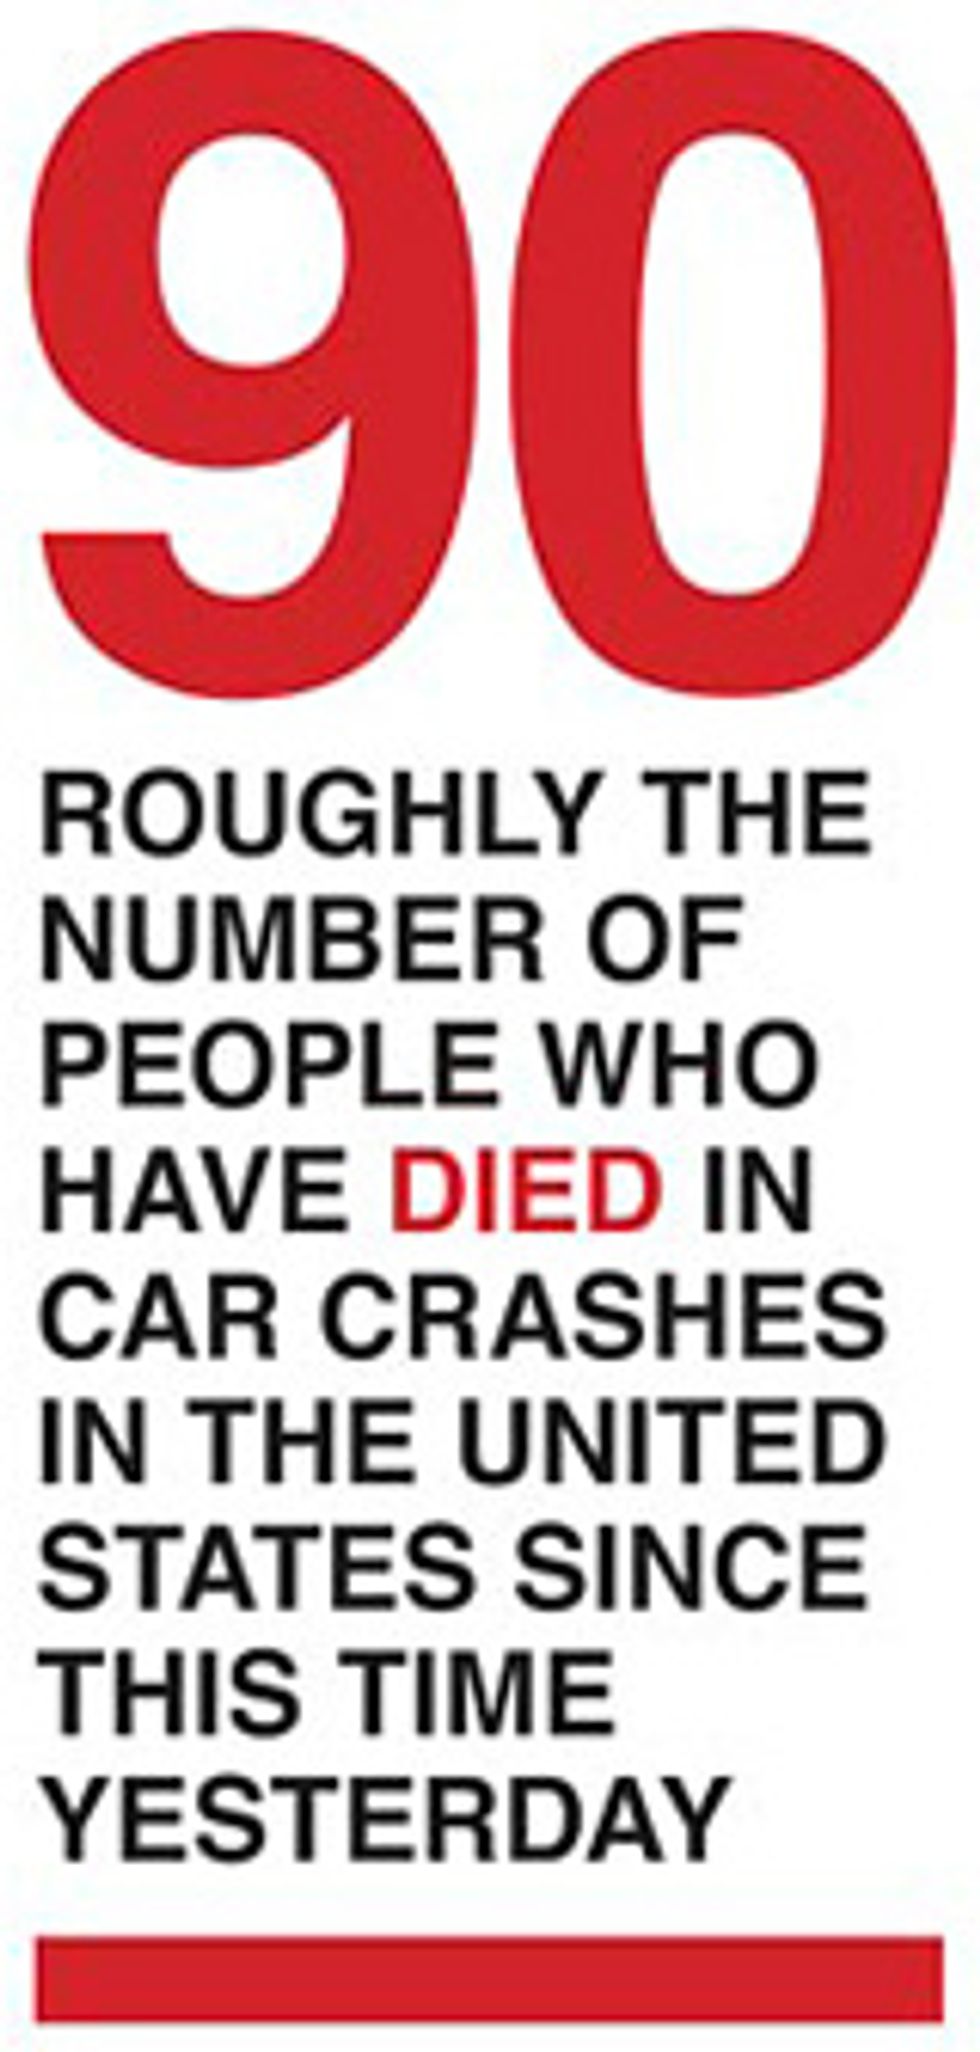 graphic info box on number of people who died in car crashes in US since this time yesterday